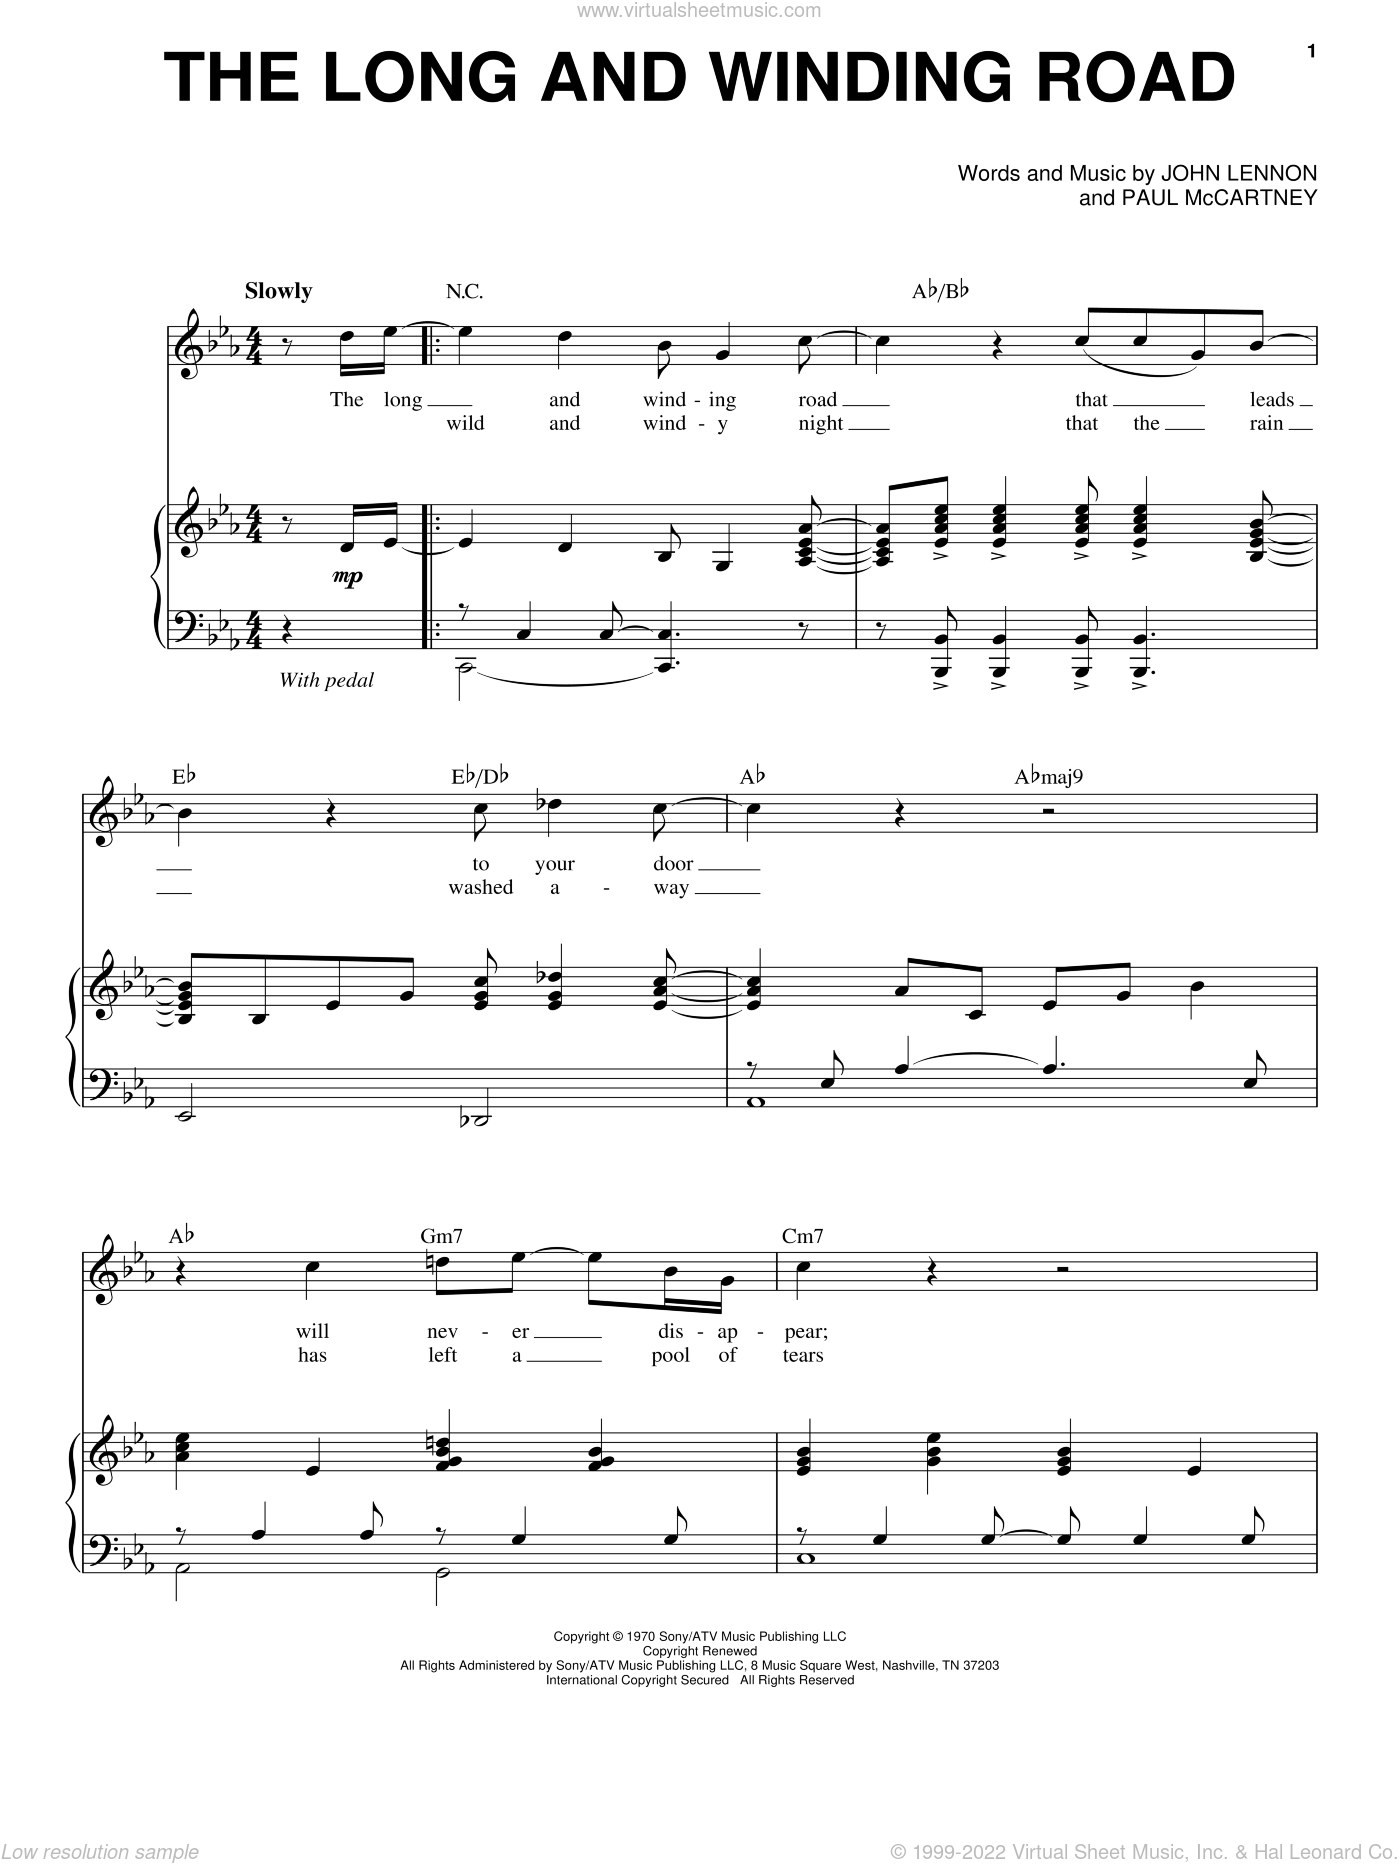 Beatles - The Long And Winding Road sheet music for voice and piano